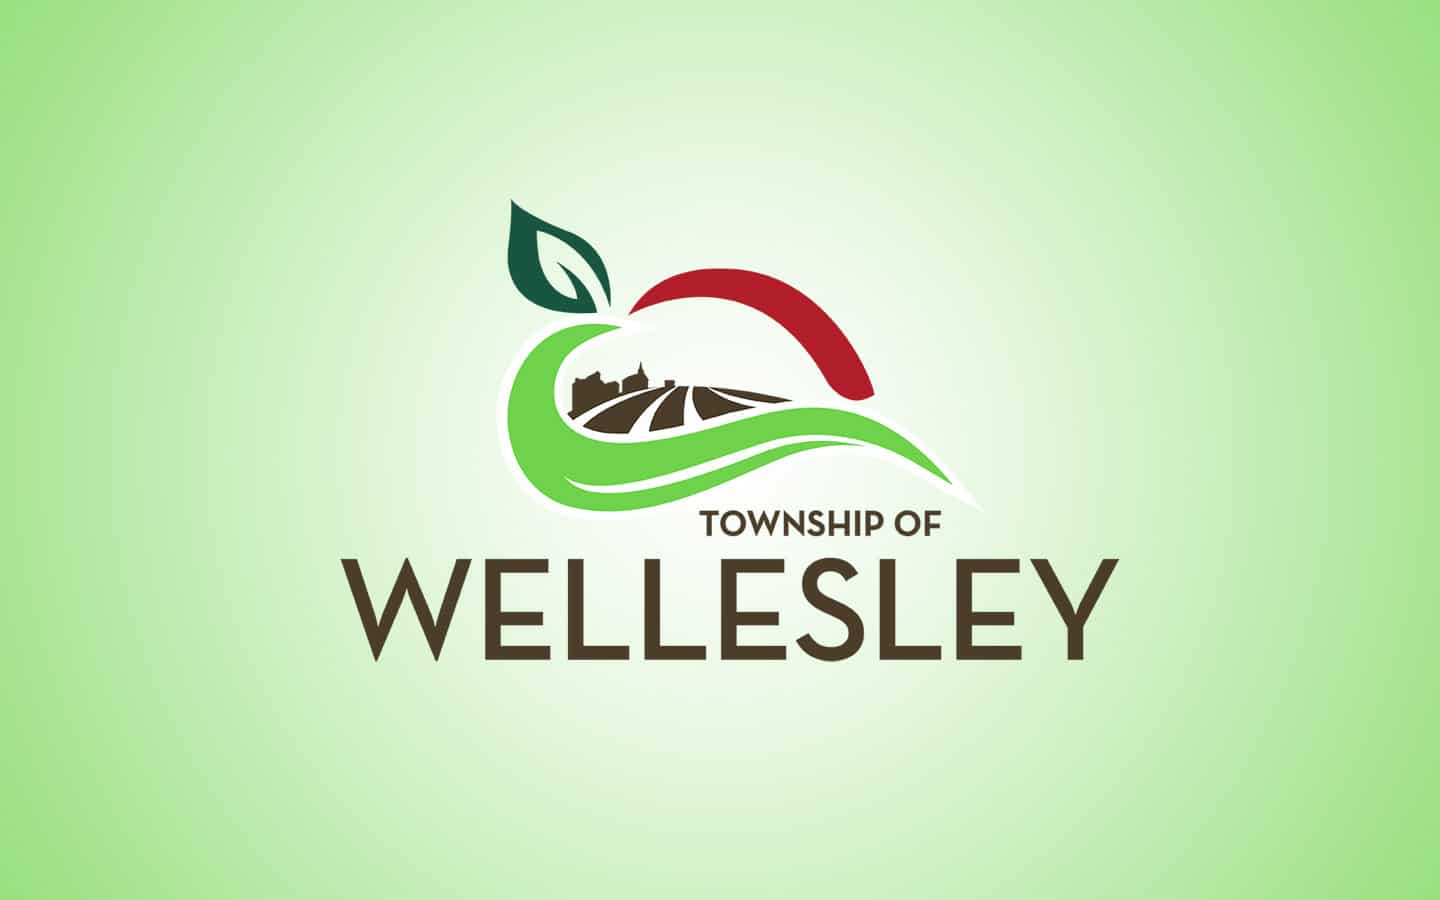 Wellesley council starts in on 2021 budget